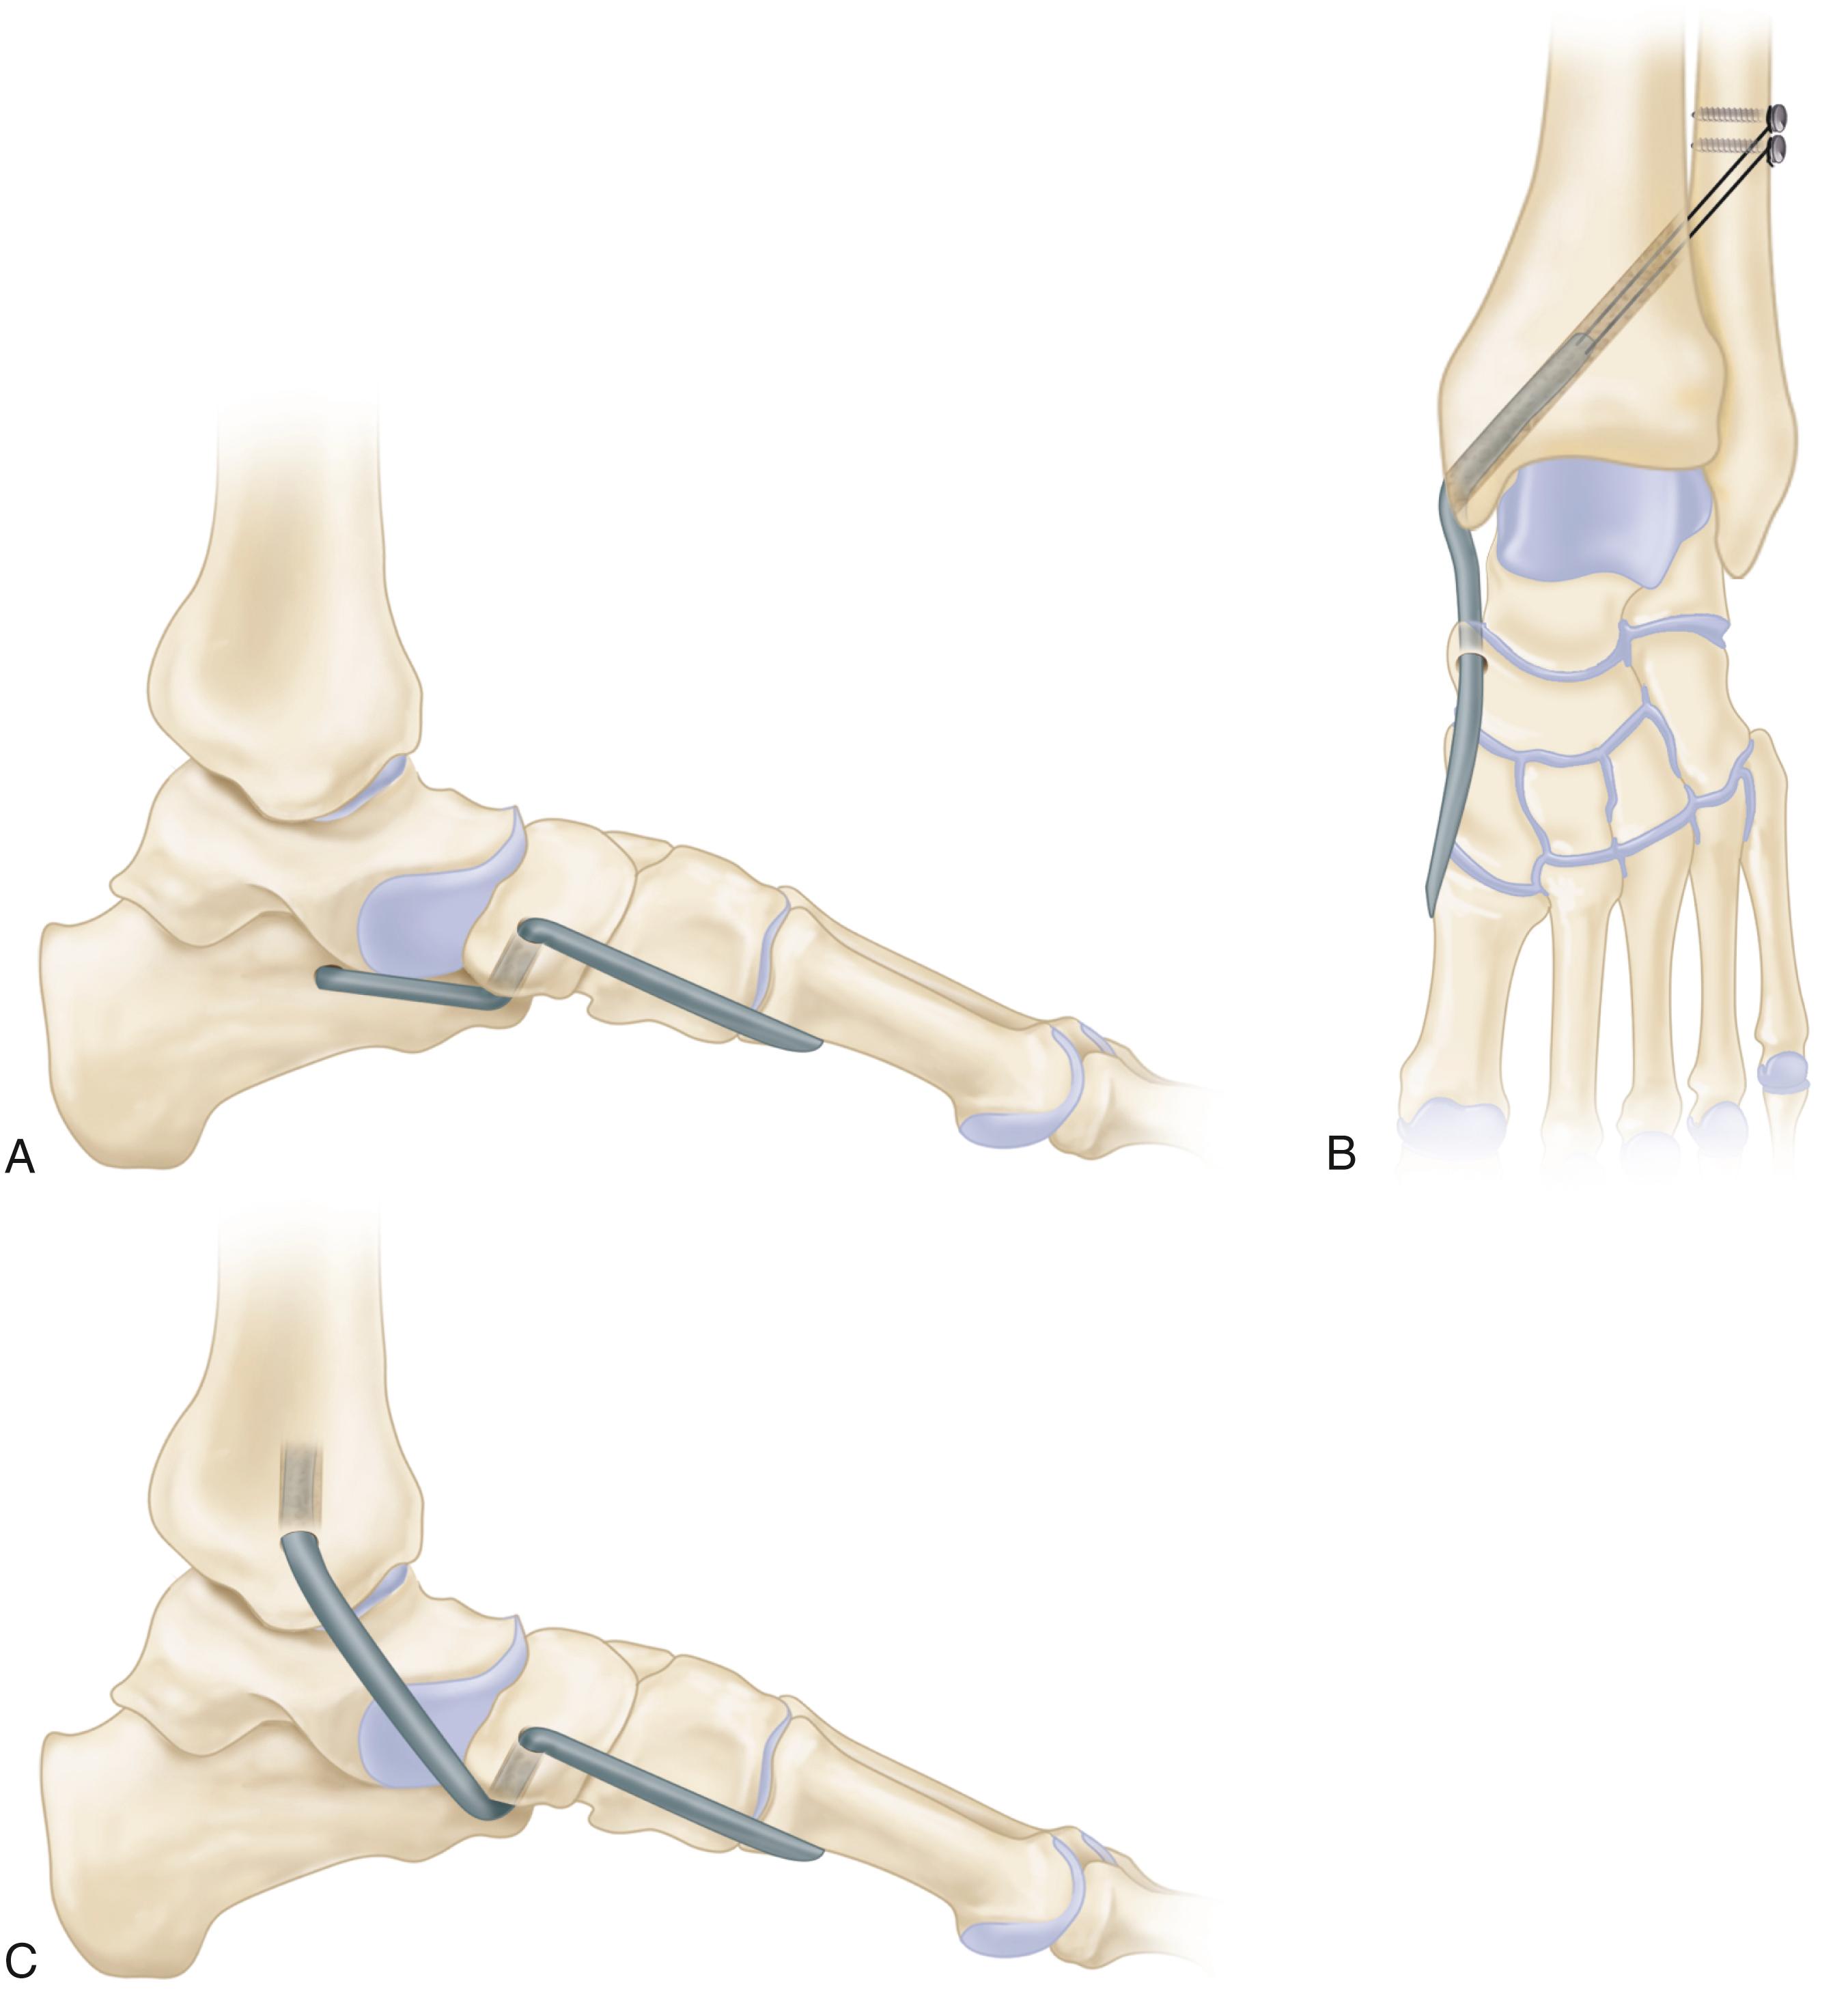 FIGURE 83.25, Reconstruction of spring ligament using peroneus longus autograft tendon transfer. A, Medial view showing calcaneal bone tunnel reconstruction. B, Anteroposterior view showing tibial bone tunnel reconstruction. C, Medial view of tibial bone tunnel reconstruction.